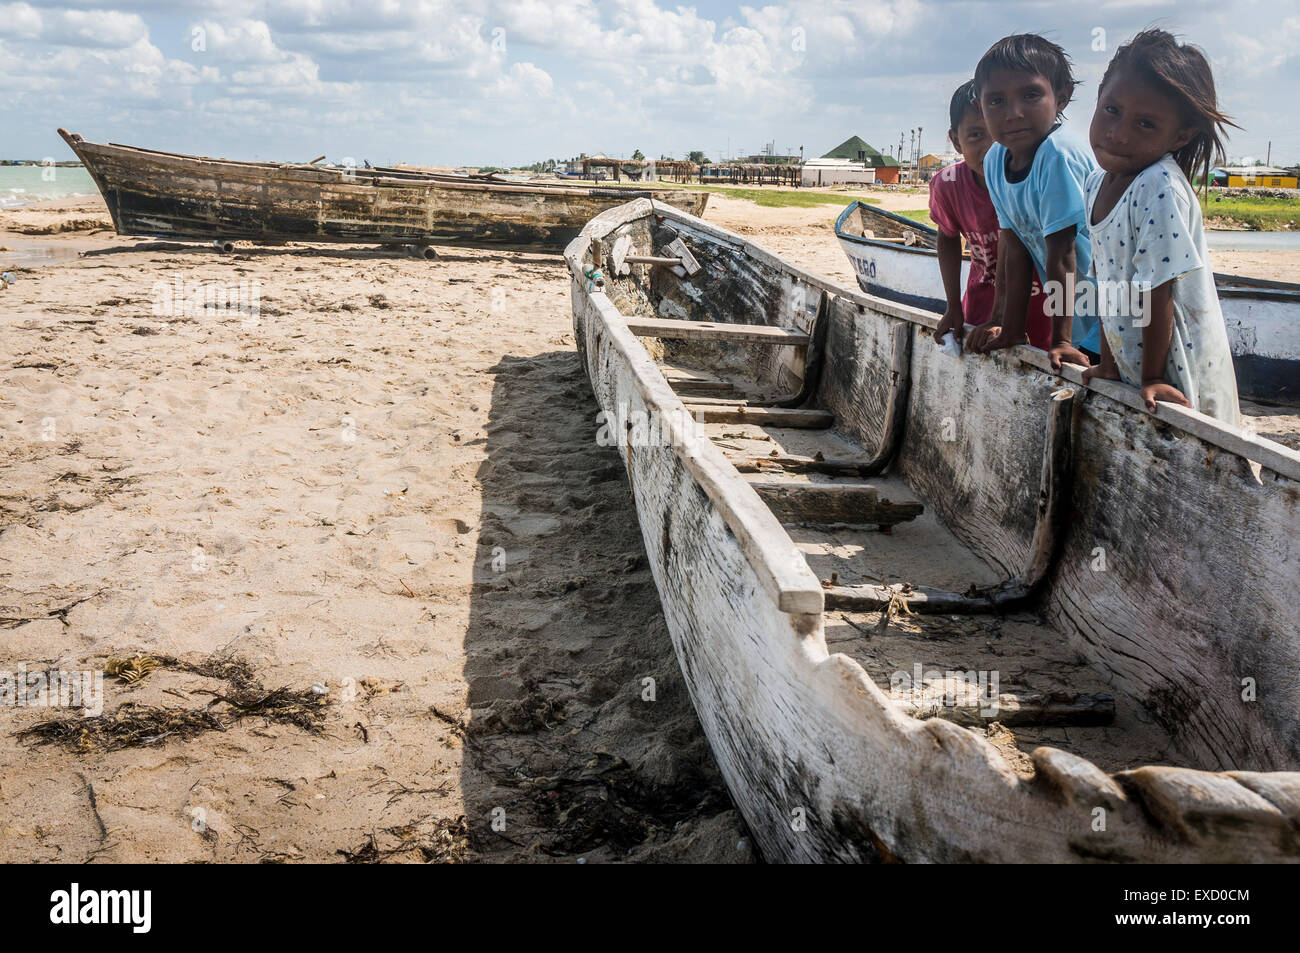 Children posing with an old dugout canoe and fishing boat on the beach at Manaure, La Guajira, Colombia. Stock Photo